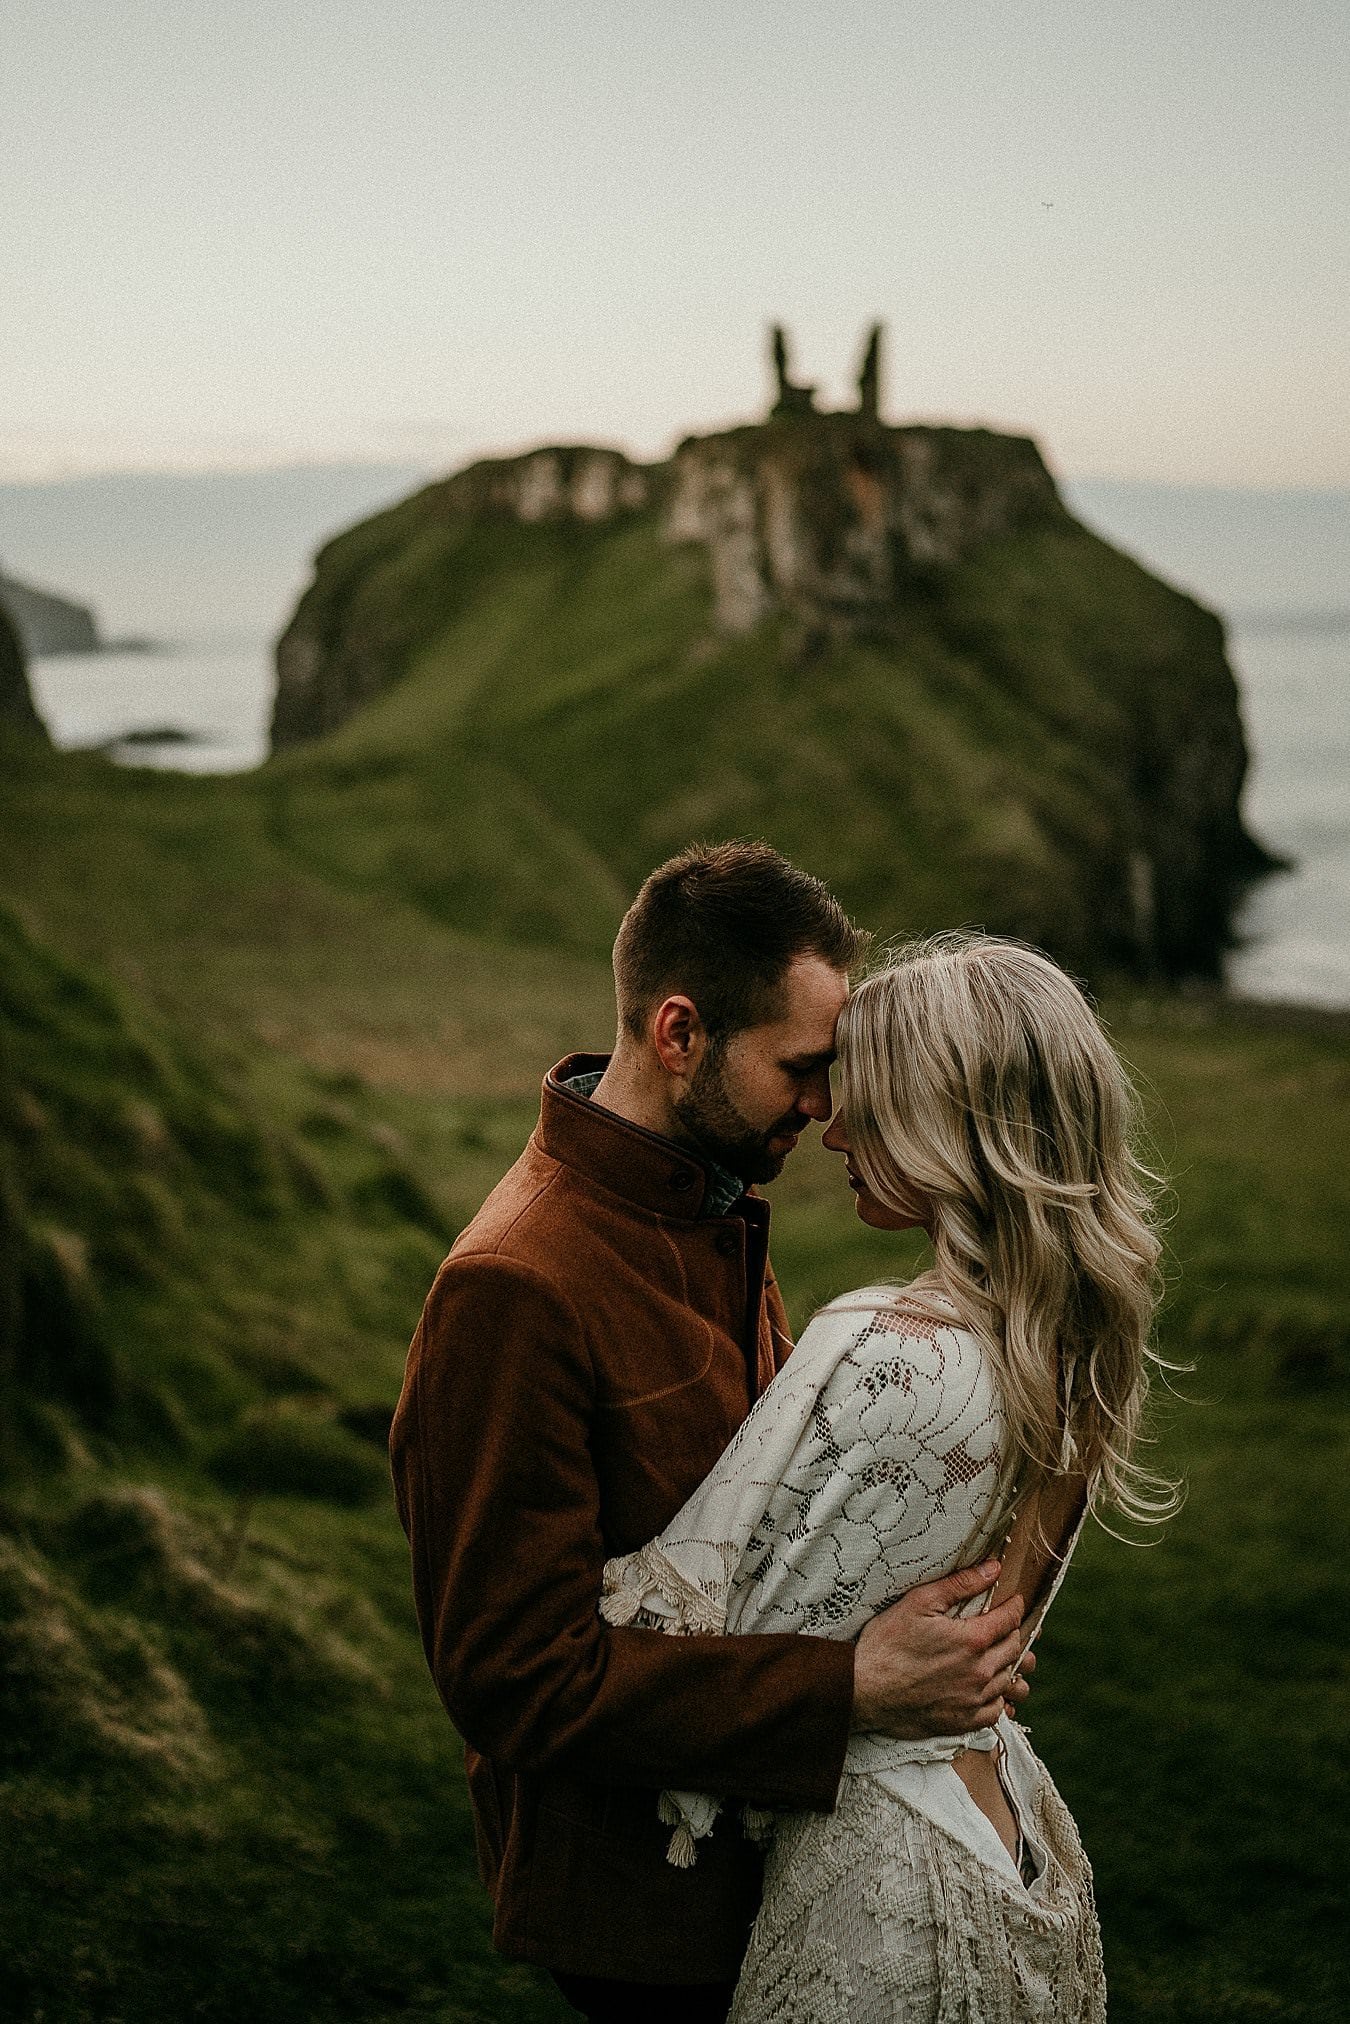 A sunset portrait in beautiful light on the Causeway Coast. Romantic adventure elopements in Europe. 